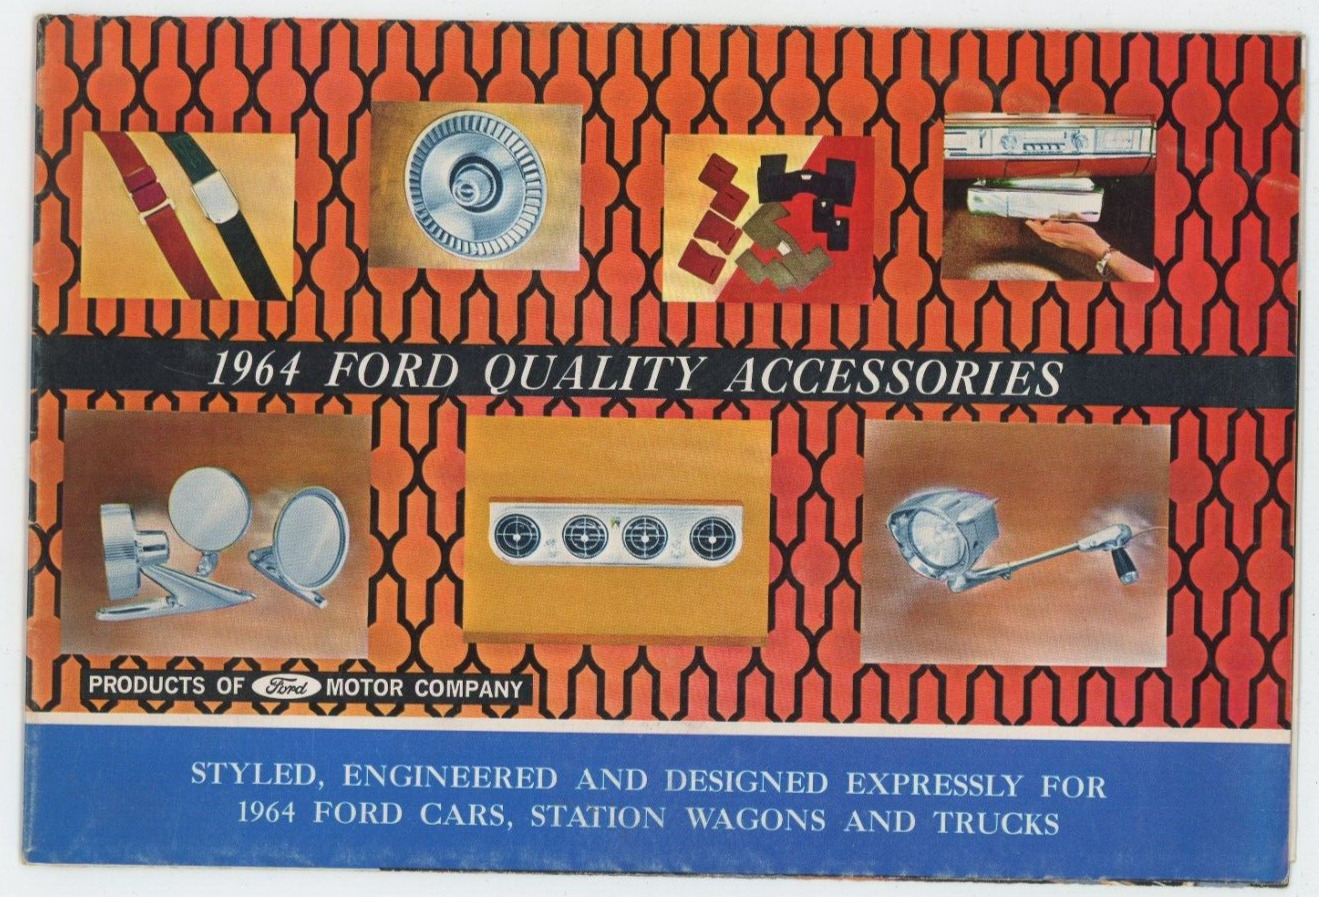 1964 Ford Quality Accessories Fold Out Brochure